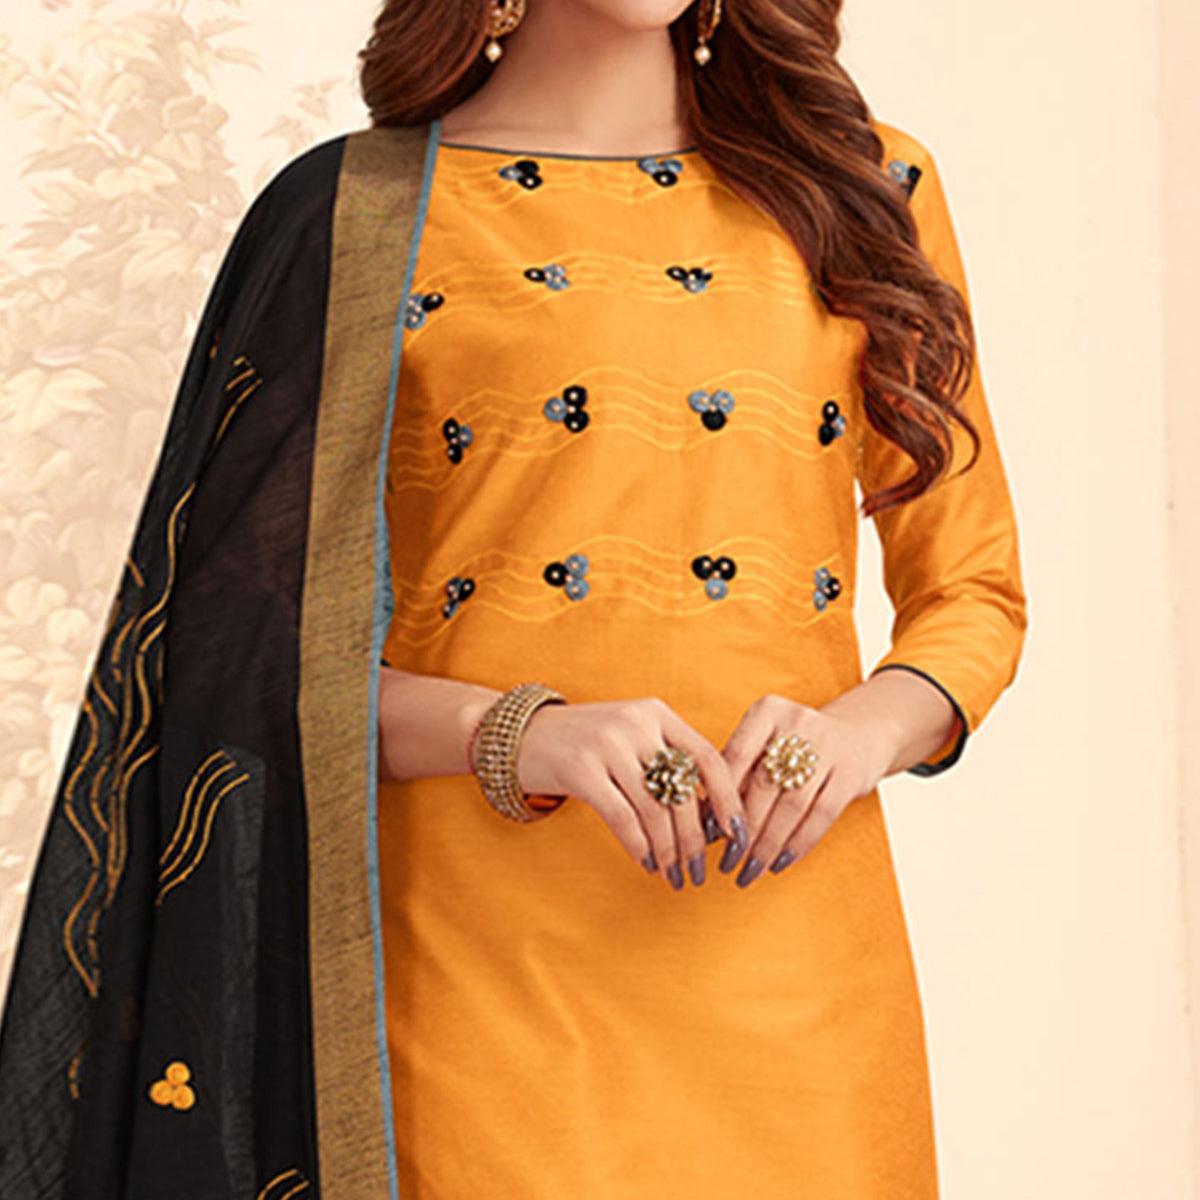 Dazzling Yellow Colored Casual Wear Embroidered Cotton Dress Material - Peachmode